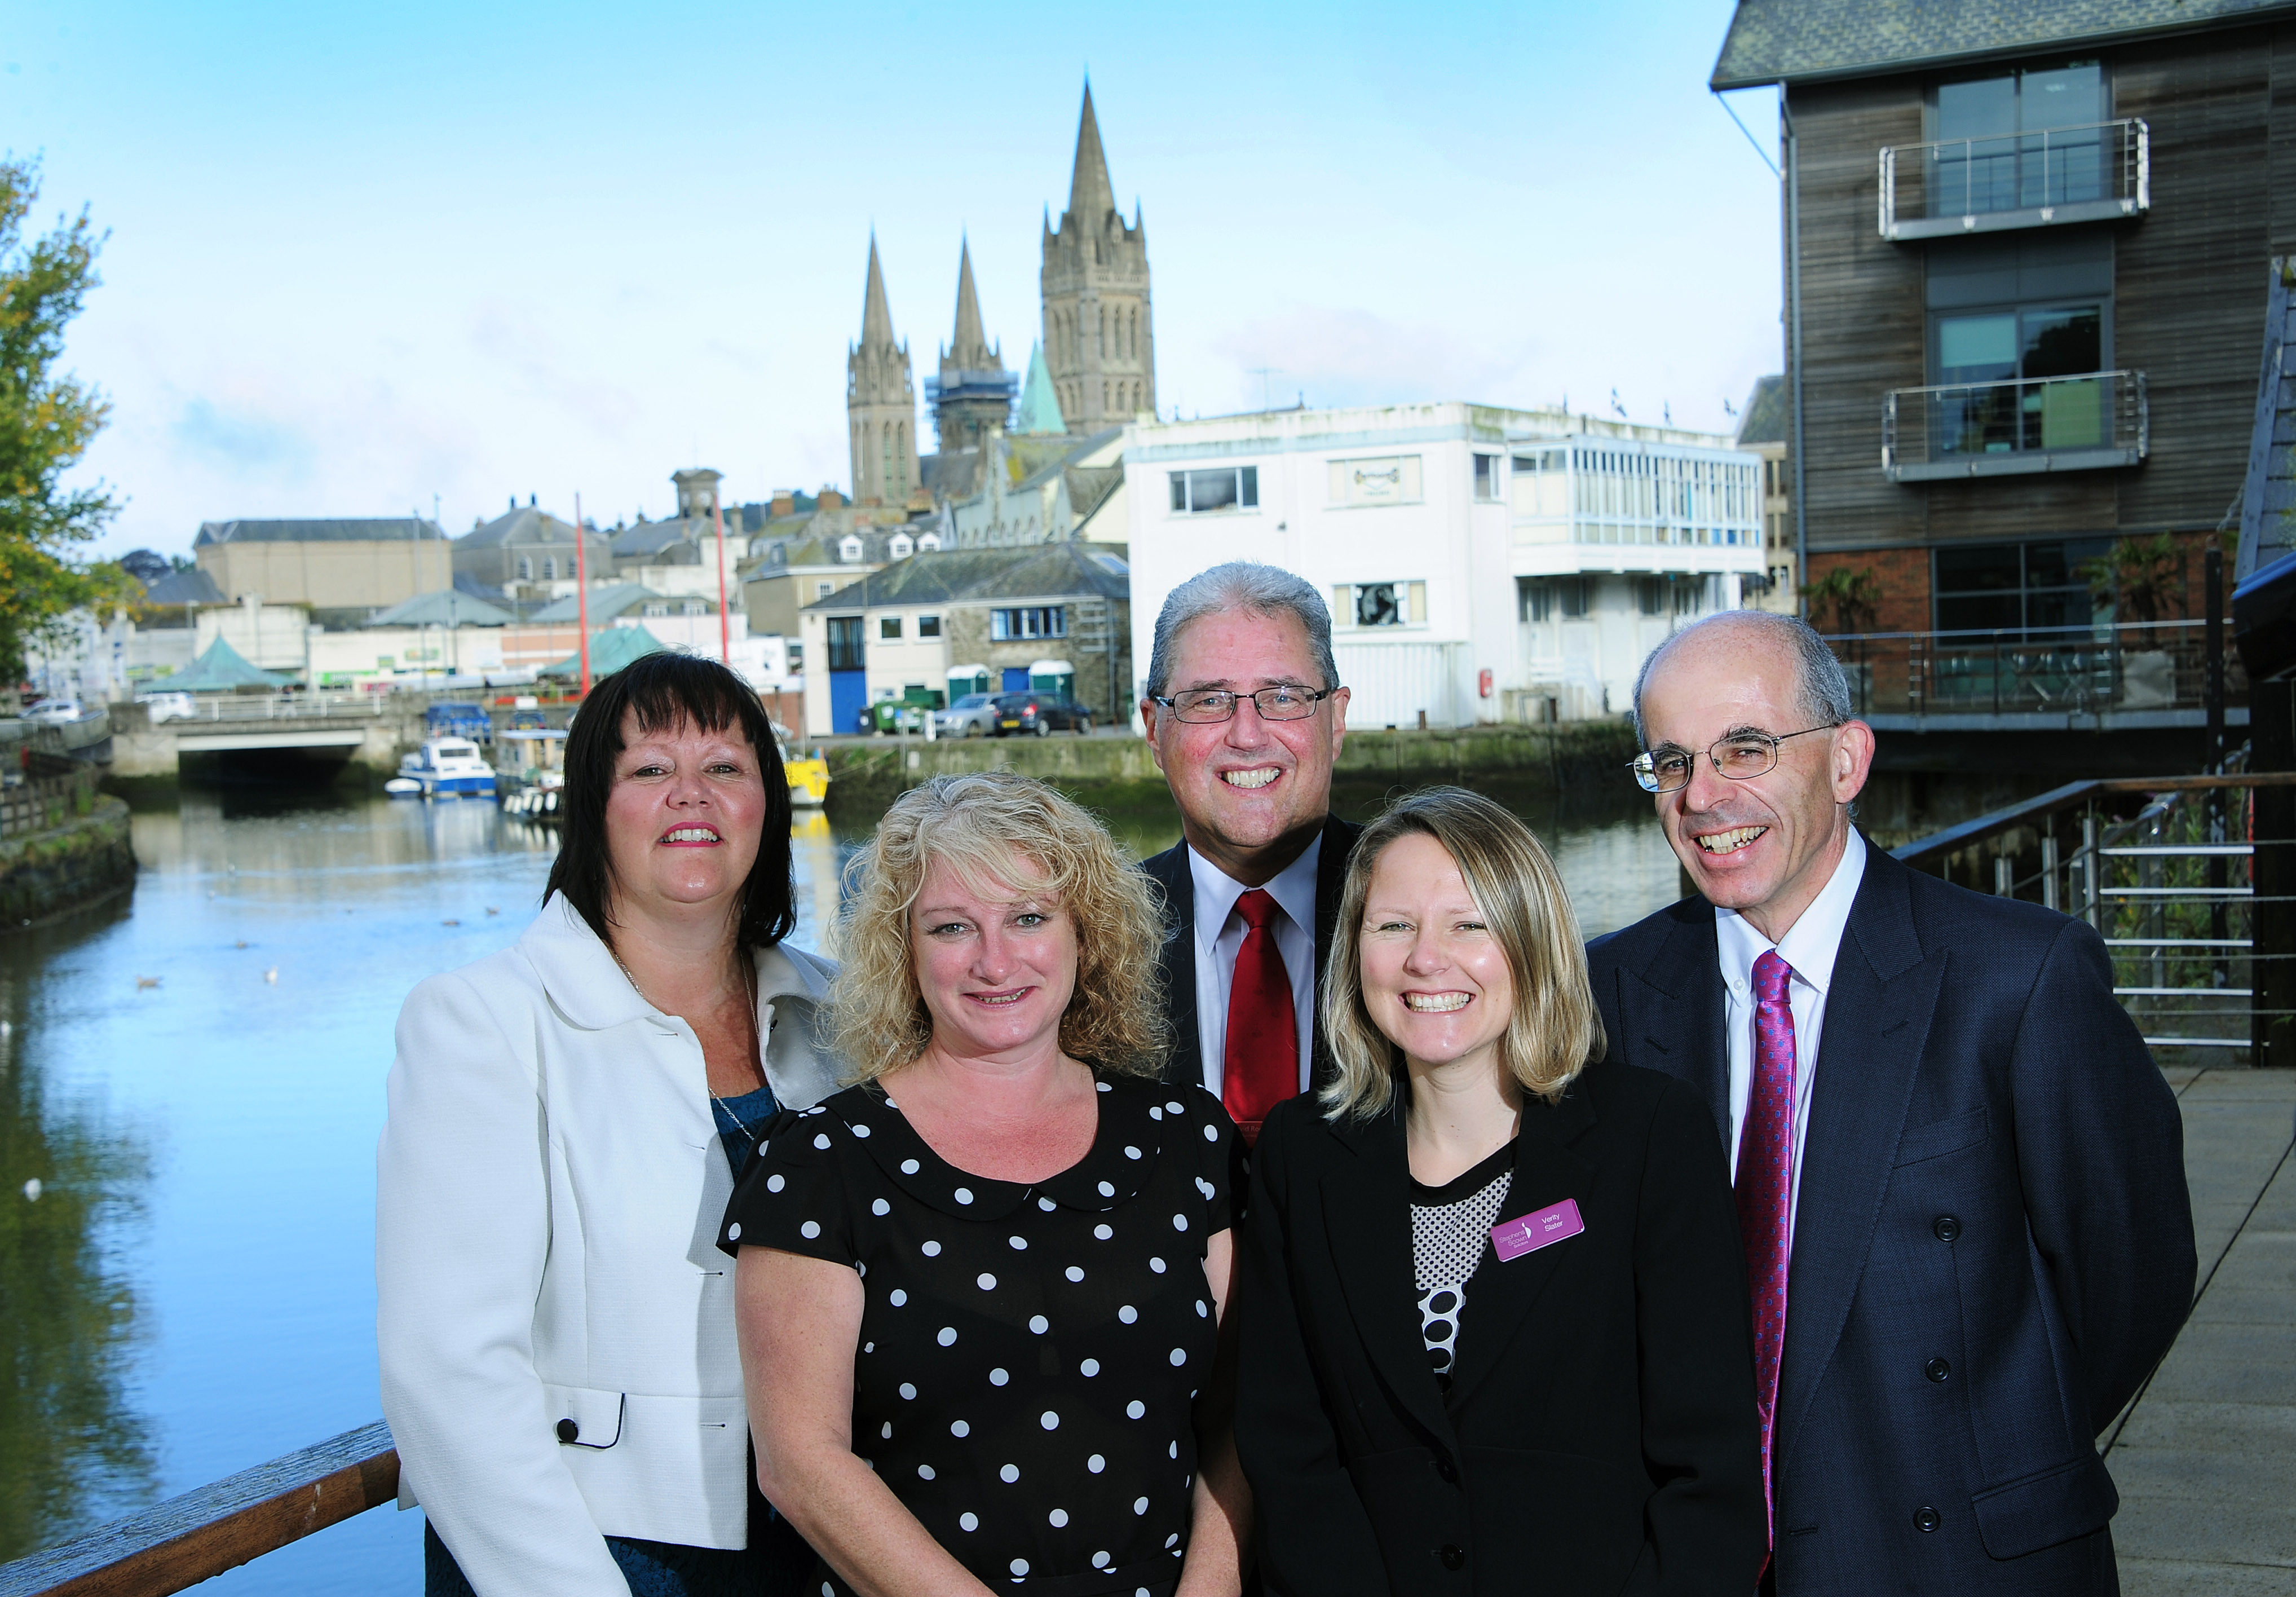 The team brining the Pension Regulator to Cornwall to discuss auto-enrolment (l-r) Debra Lawson (Lang Bennetts), Lynne Williams (Worldwide Financial Planning), David Rogers (Santander), Verity Slater (Stephens Scown) and Jonathan Mashen (Lang Bennetts)